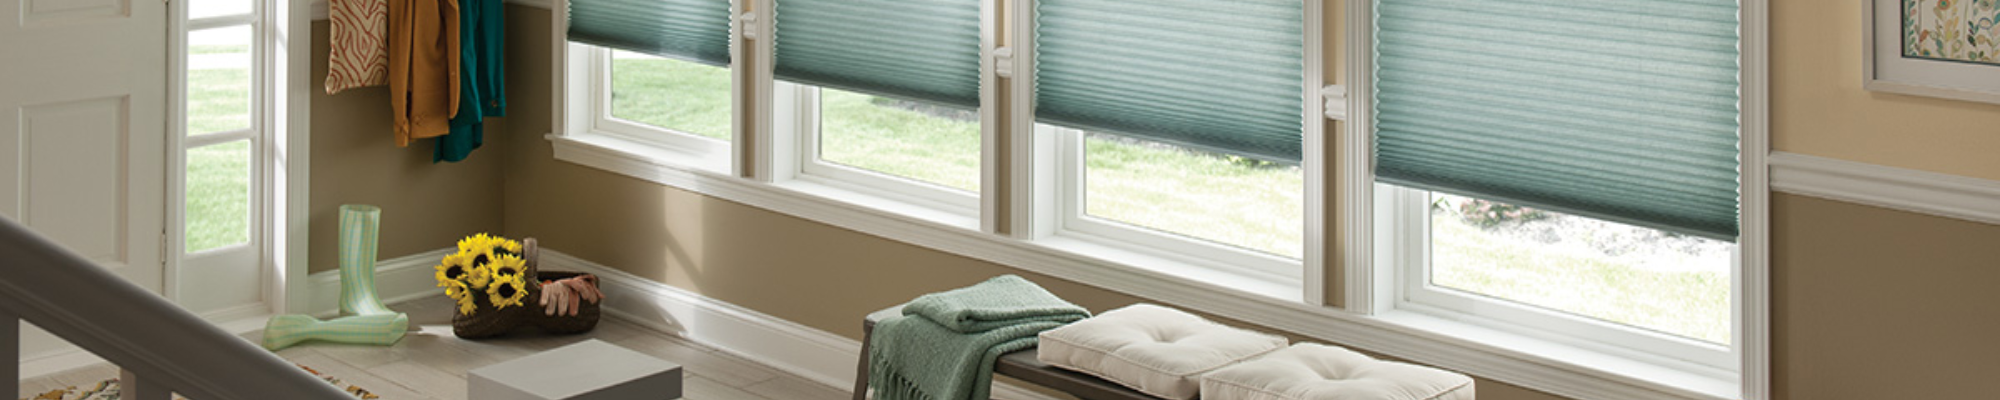 Living Room Windows With Blinds